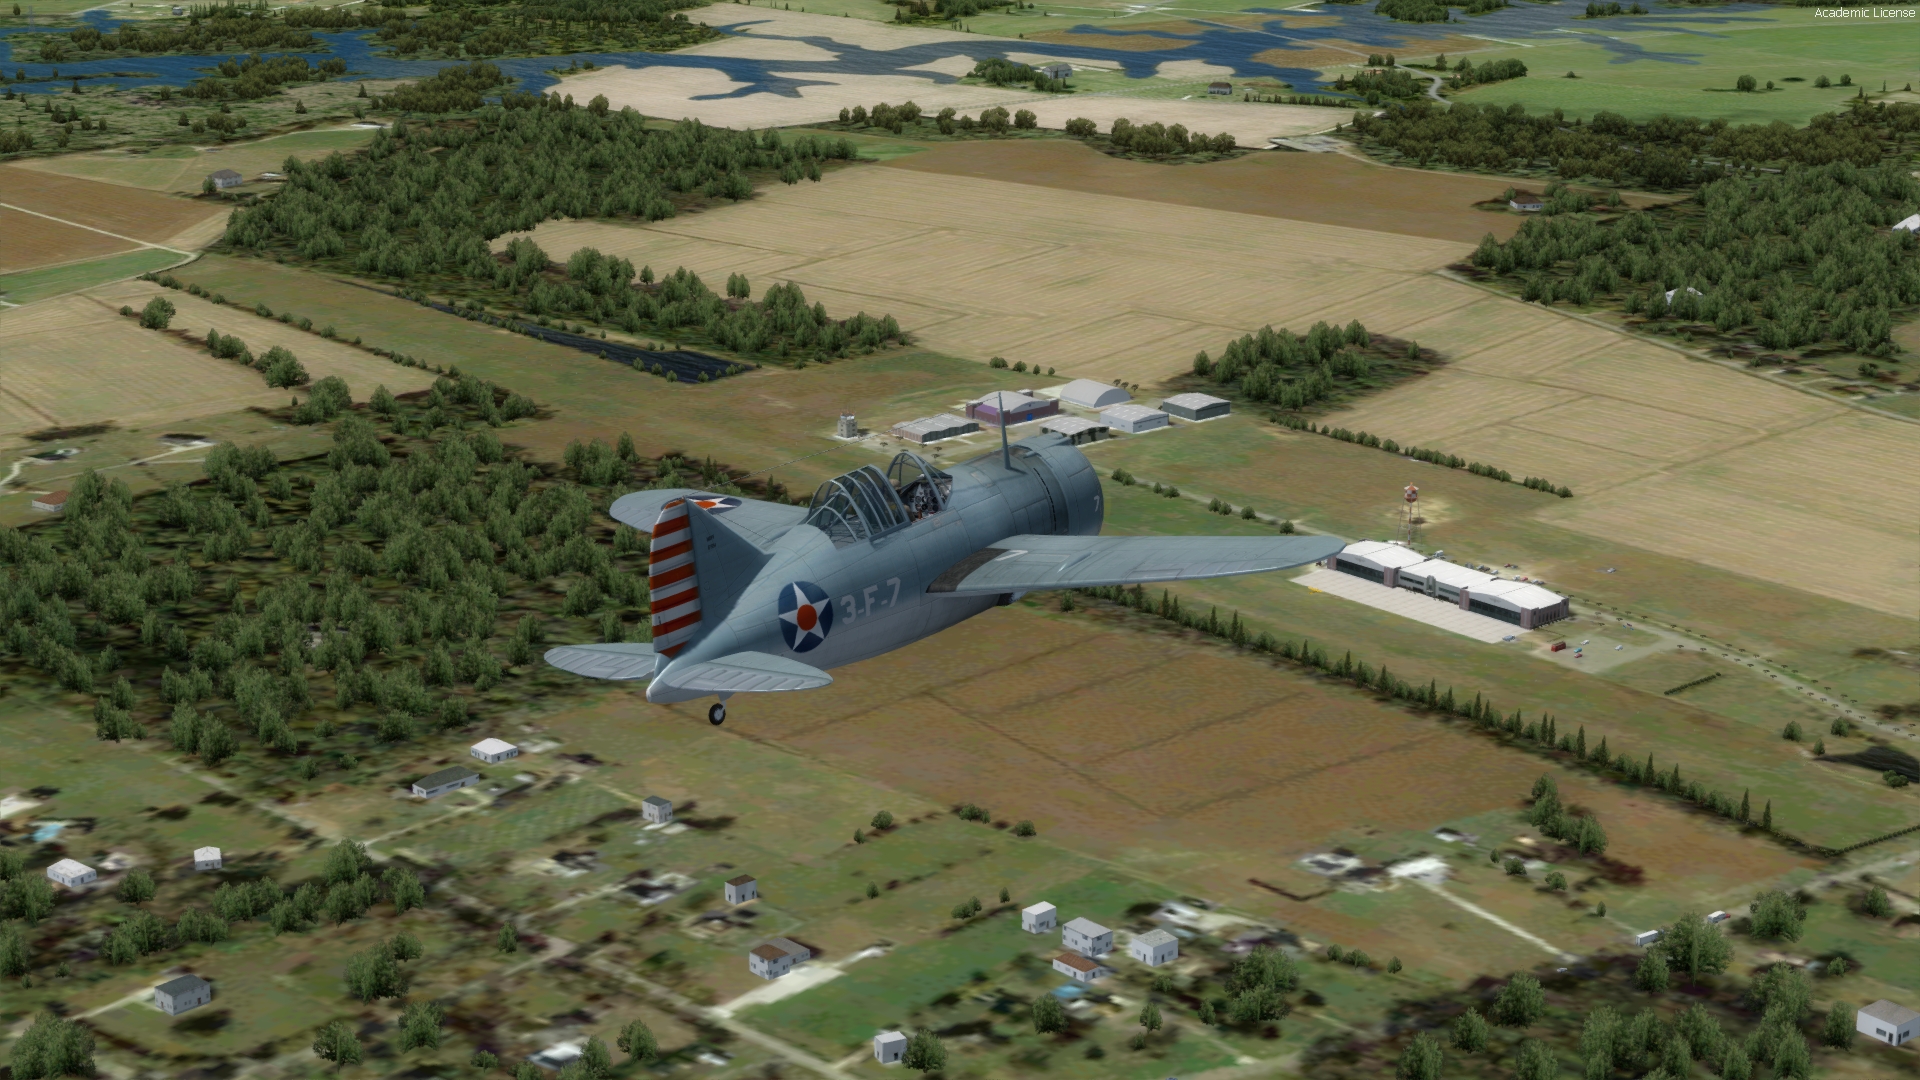 Brewster F2A Buffalo Wallpapers